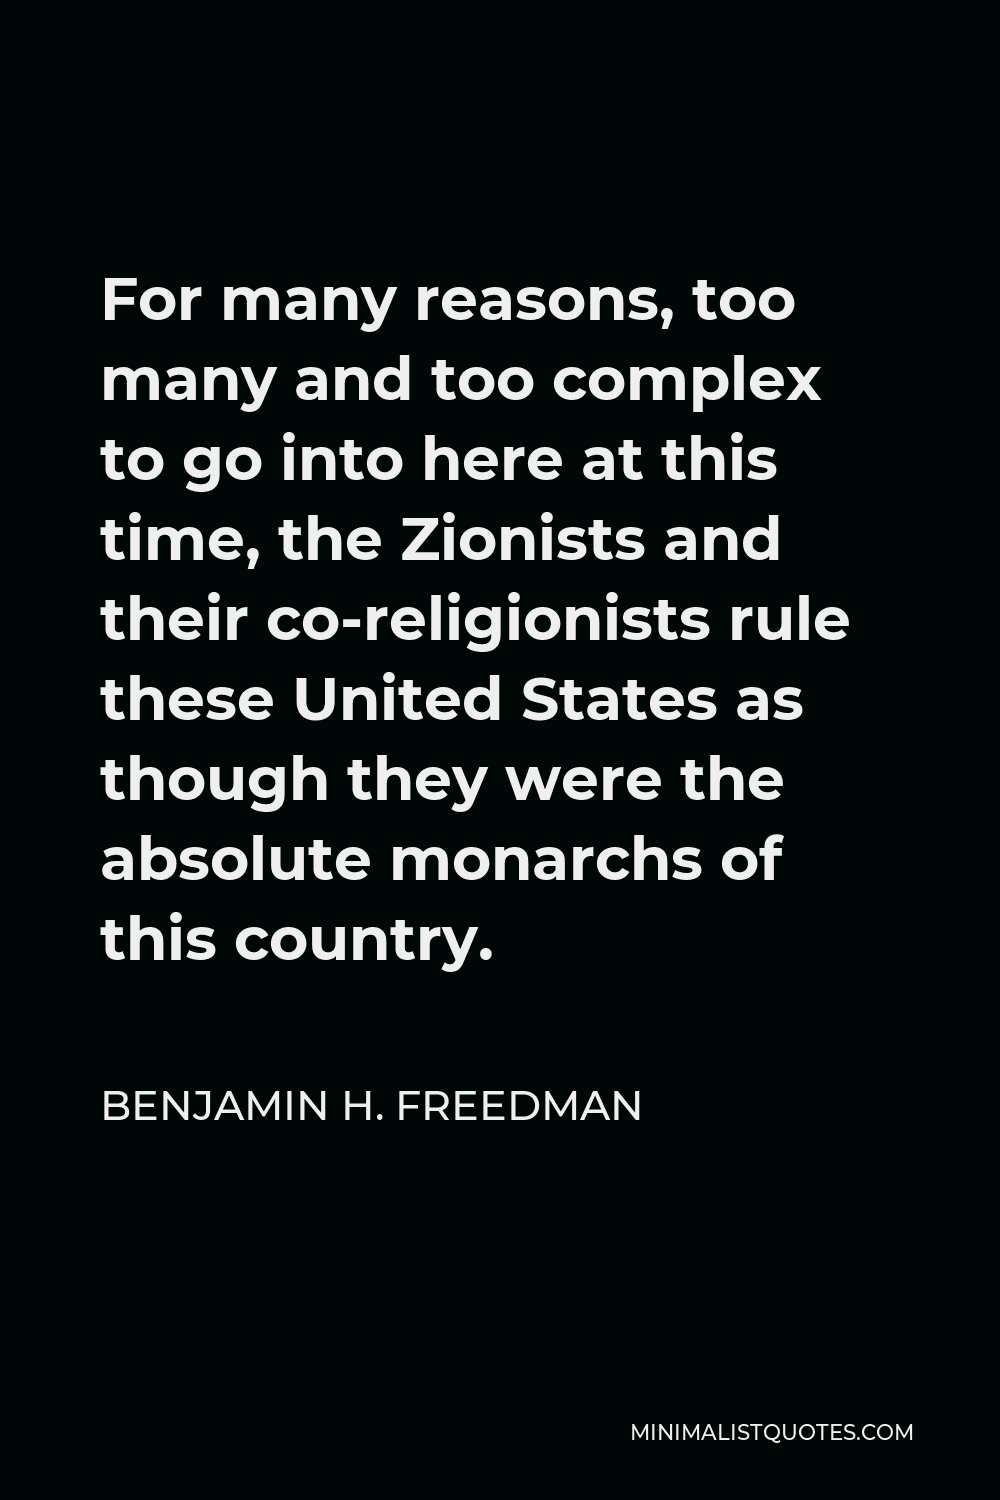 Benjamin H. Freedman Quote - For many reasons, too many and too complex to go into here at this time, the Zionists and their co-religionists rule these United States as though they were the absolute monarchs of this country.